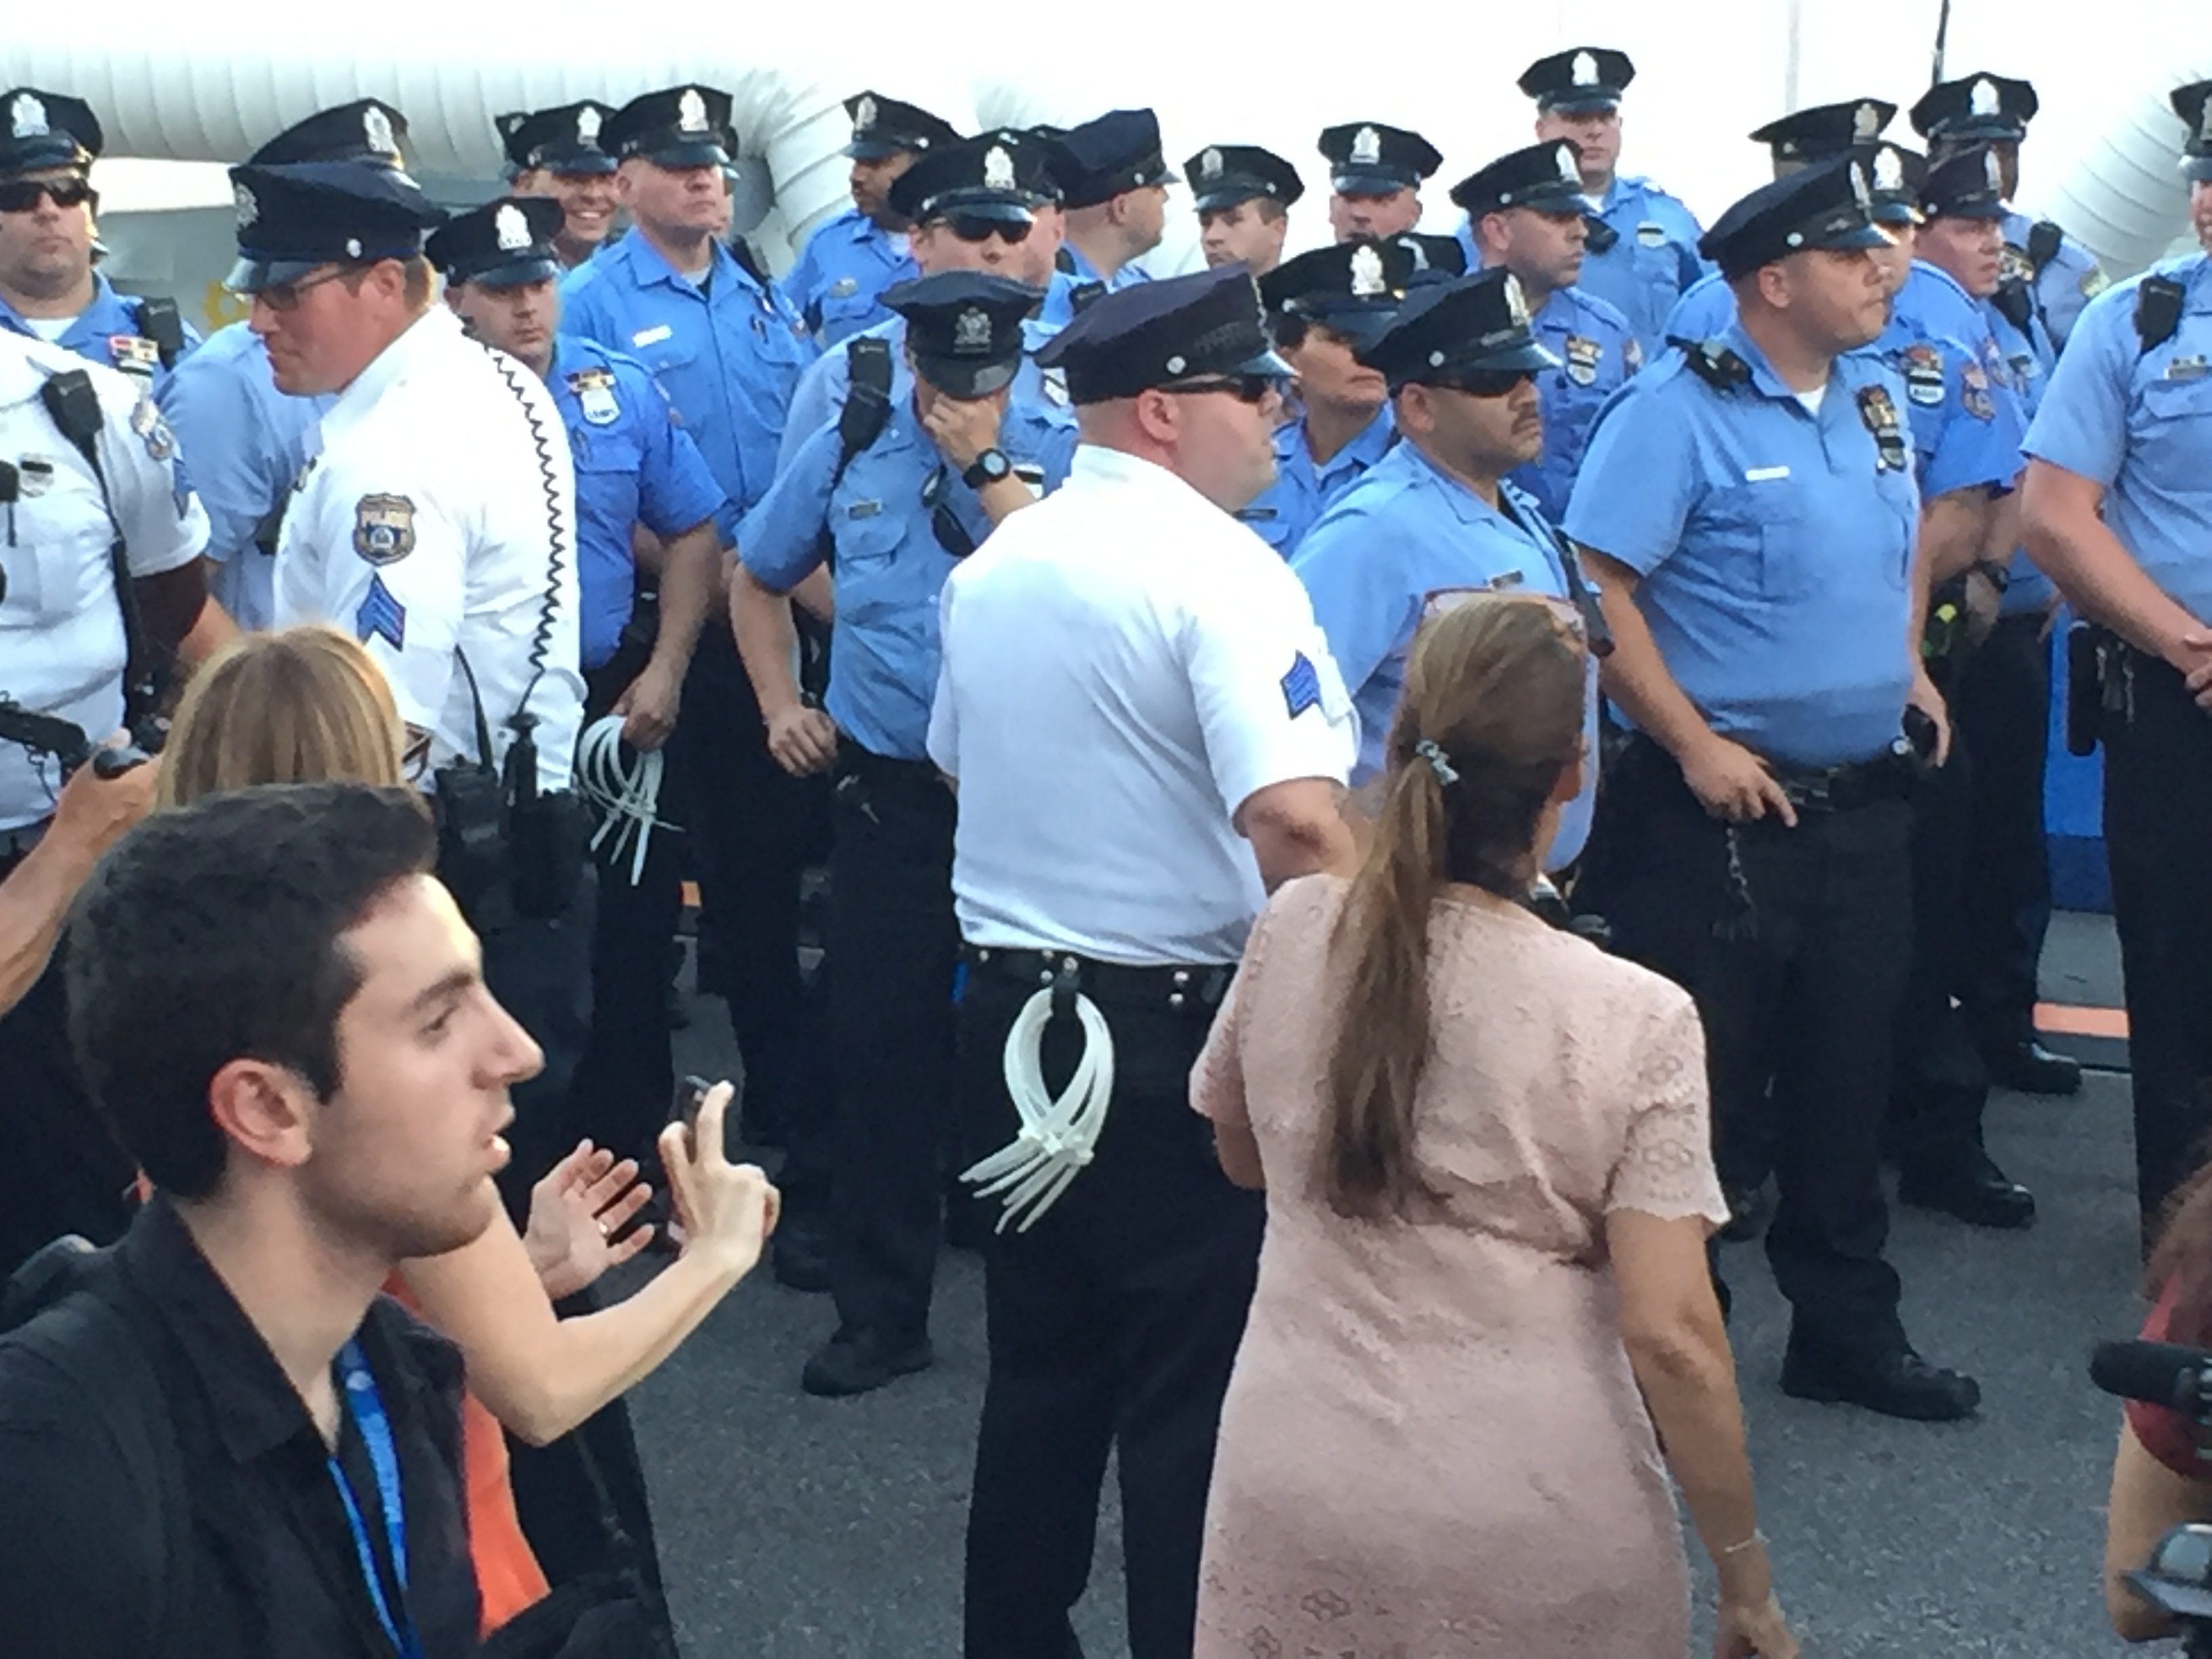 Bernie Sanders supporters protest inside media pavilion drawing police and media